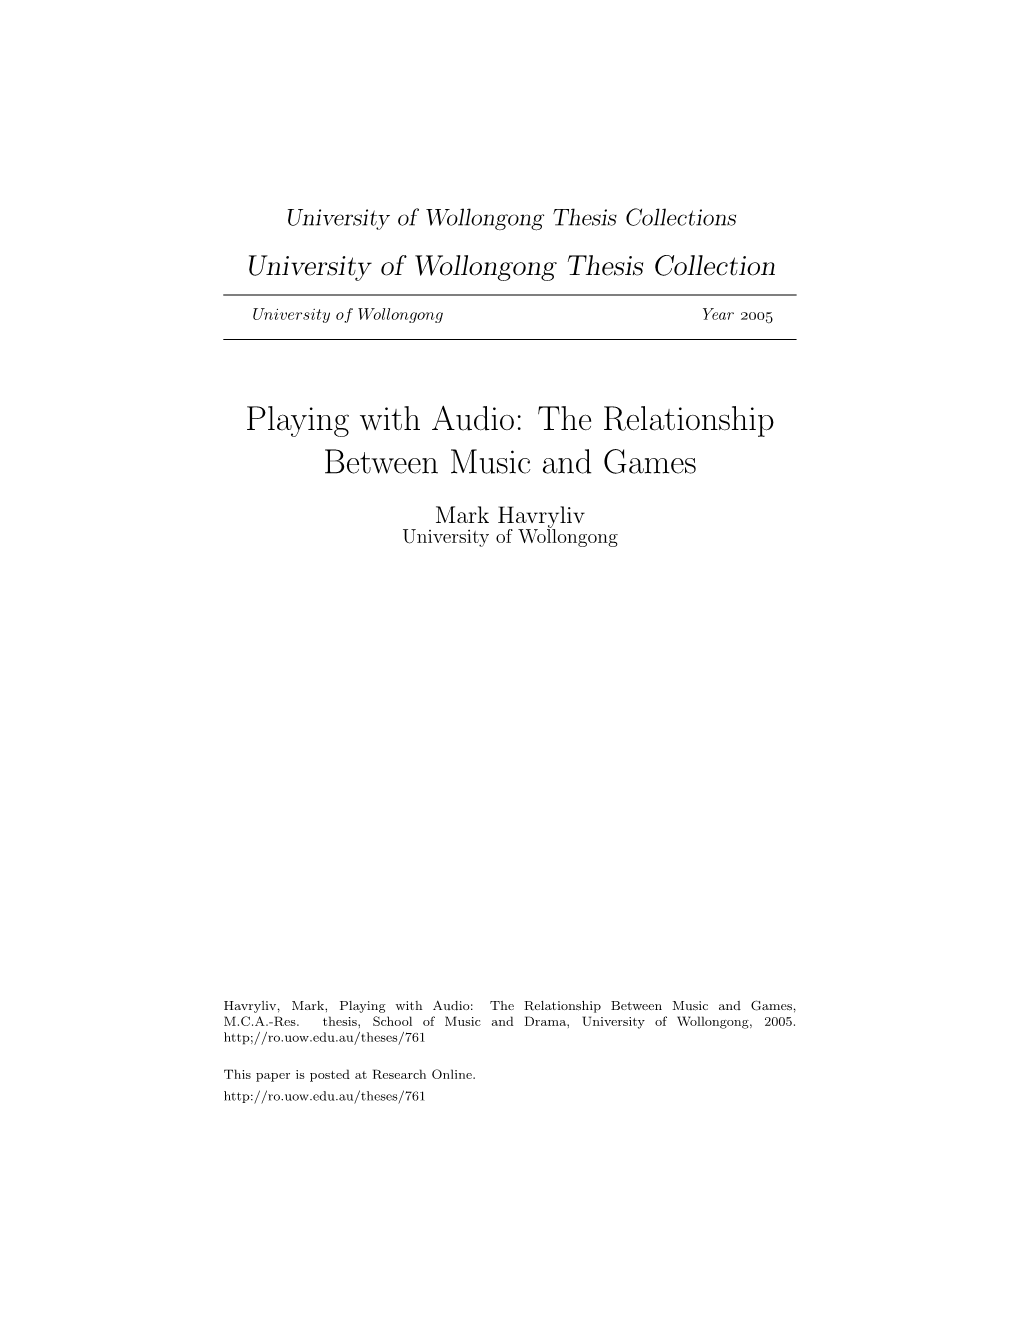 The Relationship Between Music and Games Mark Havryliv University of Wollongong